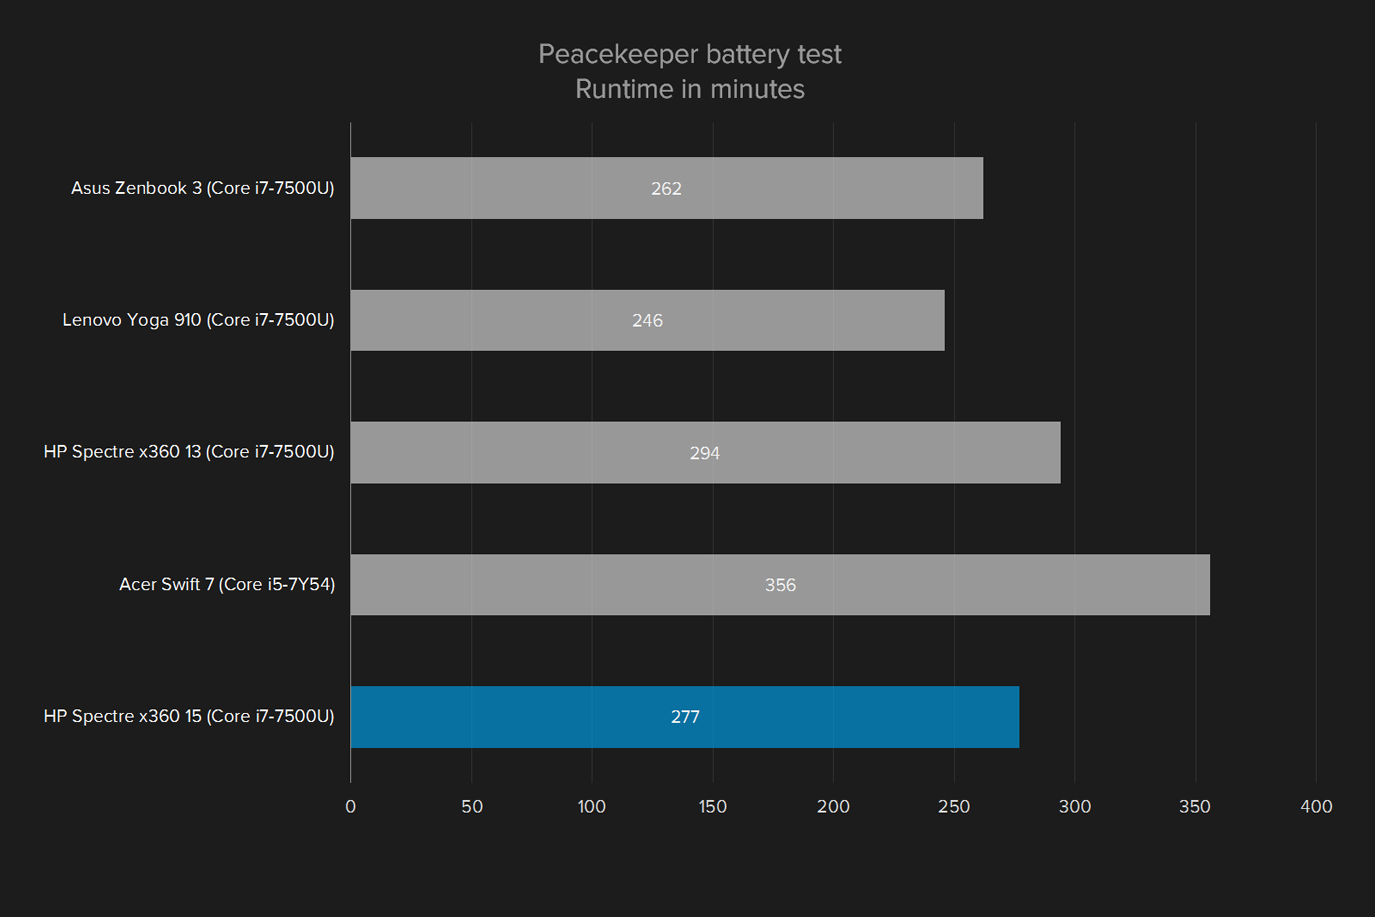 hp spectre x360 15 review peacekeeper battery text